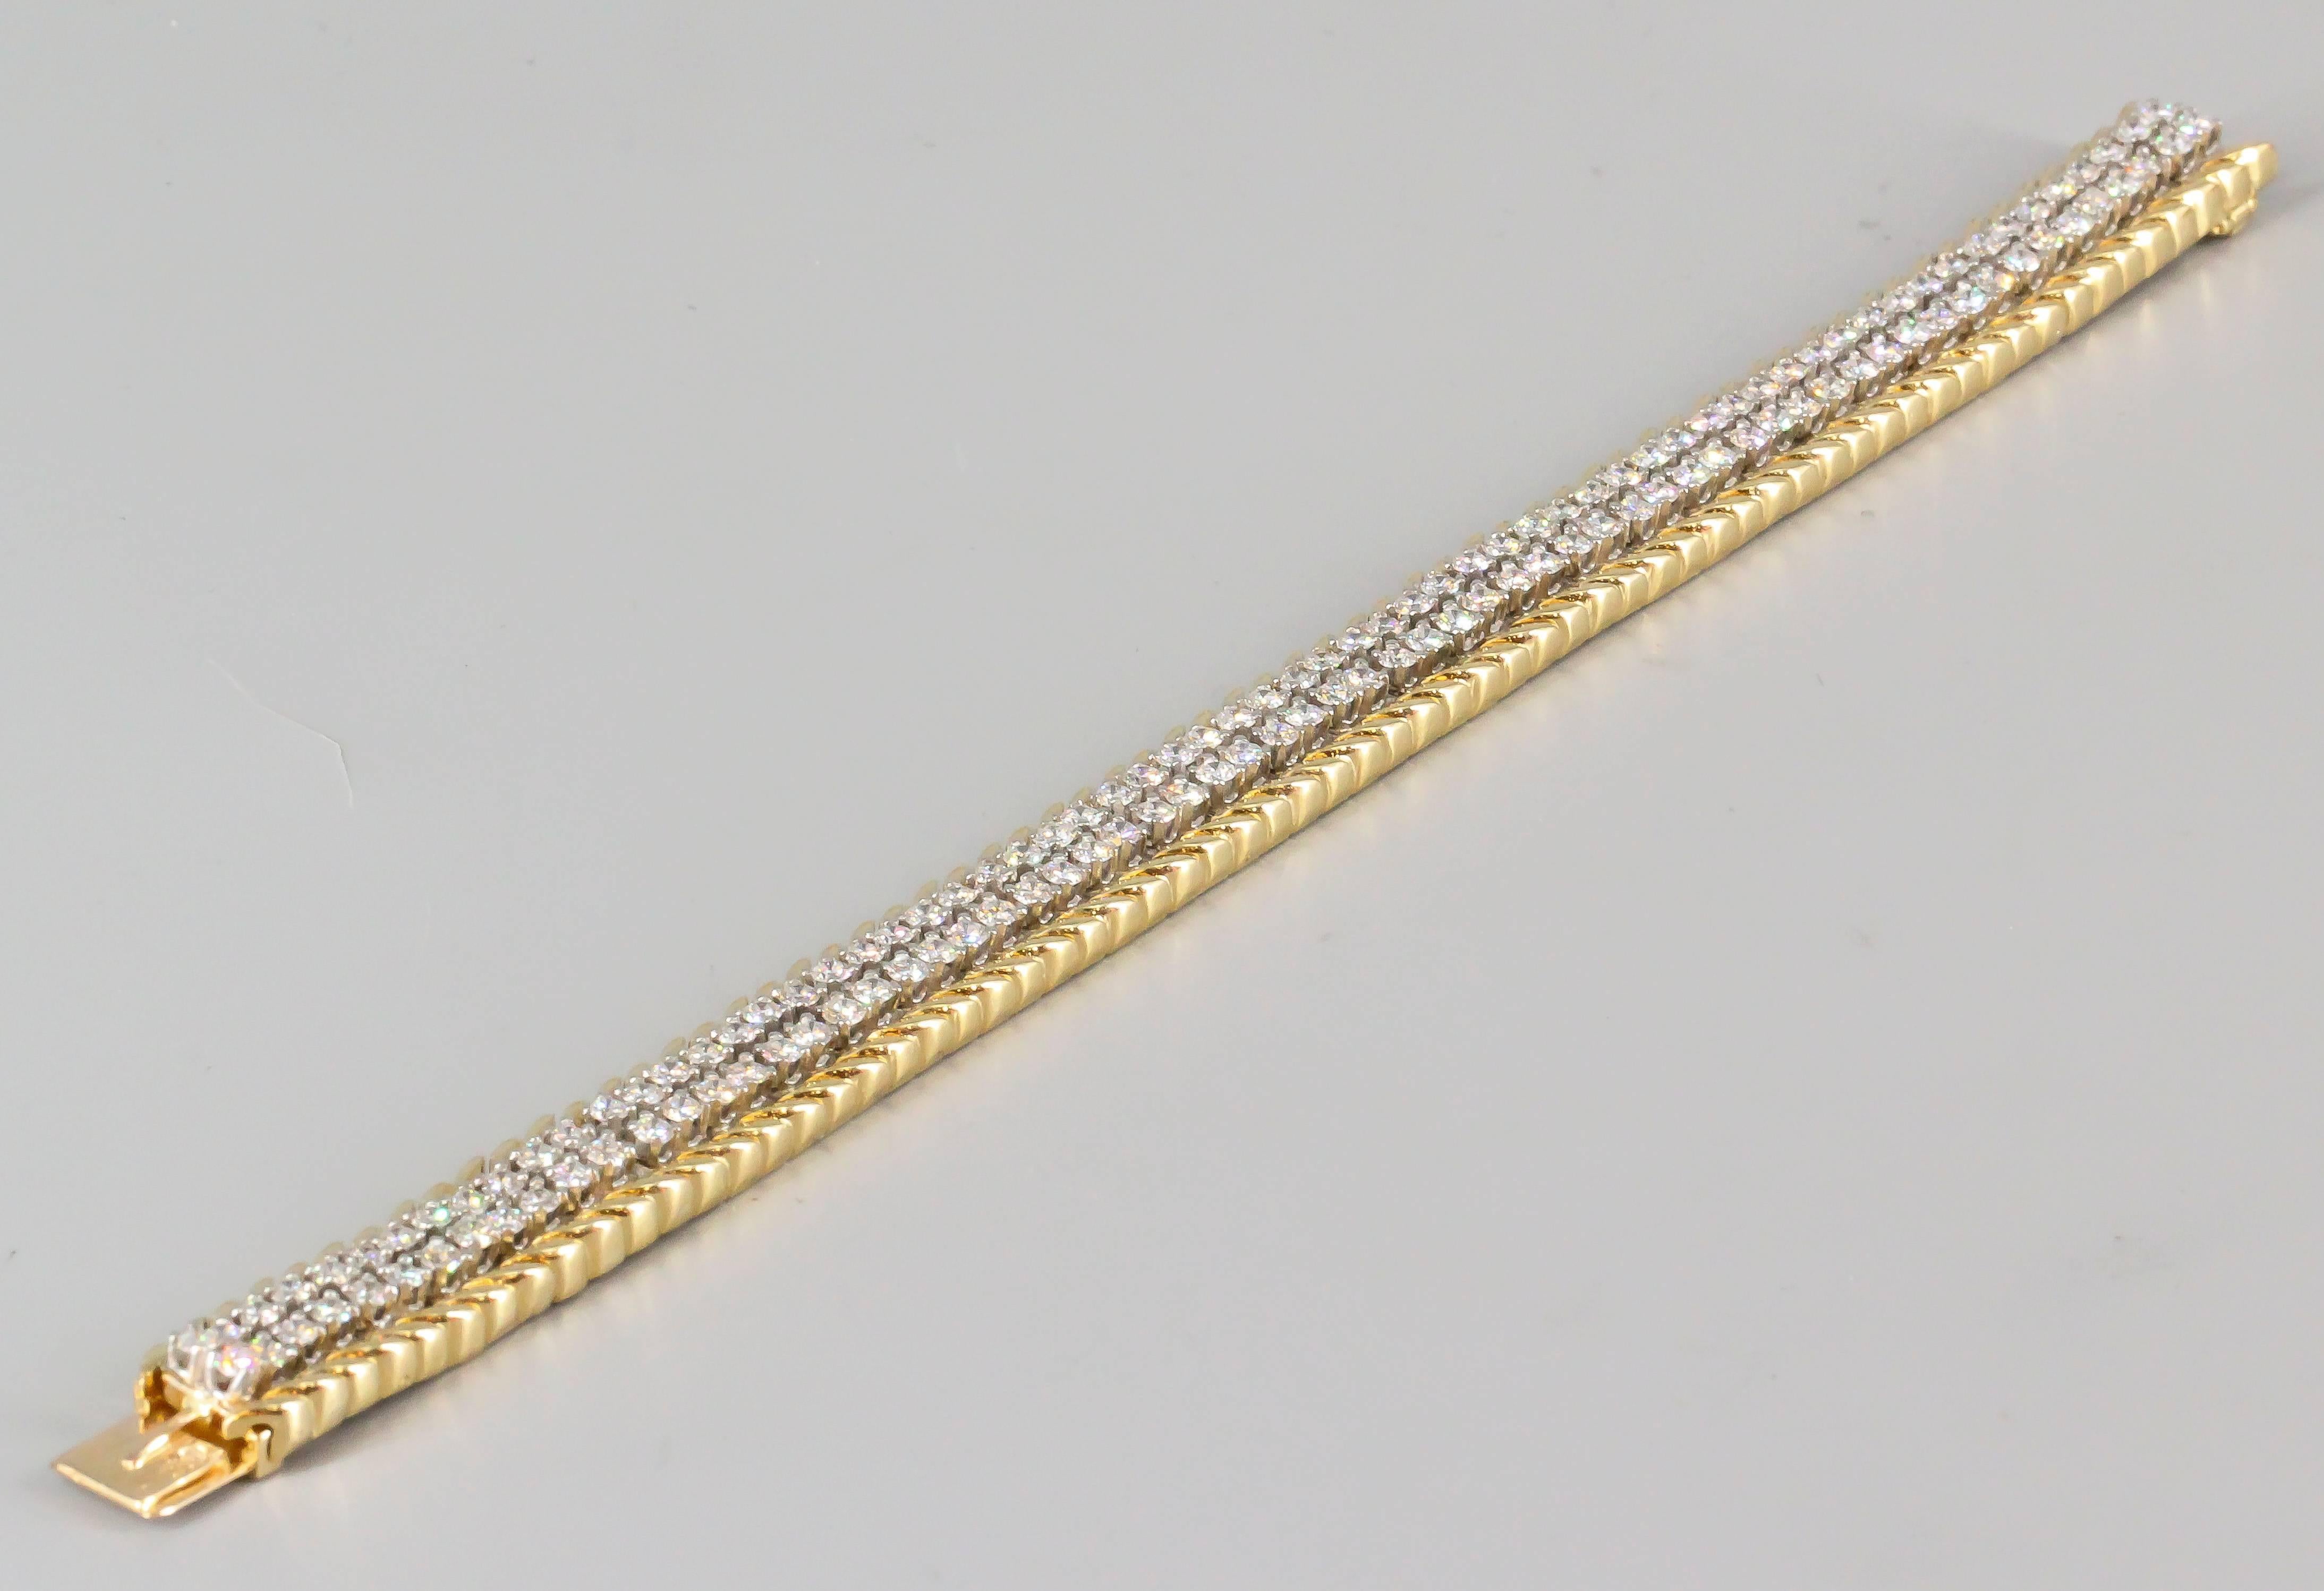 Refined diamond and 18K yellow gold link bracelet by Verdura. It features two rows of very high grade round brilliant cut diamonds, approx. 8.0cts total weight. Beautifully made and highly stylish.

Hallmarks: Verdura, French 18K gold and platinum